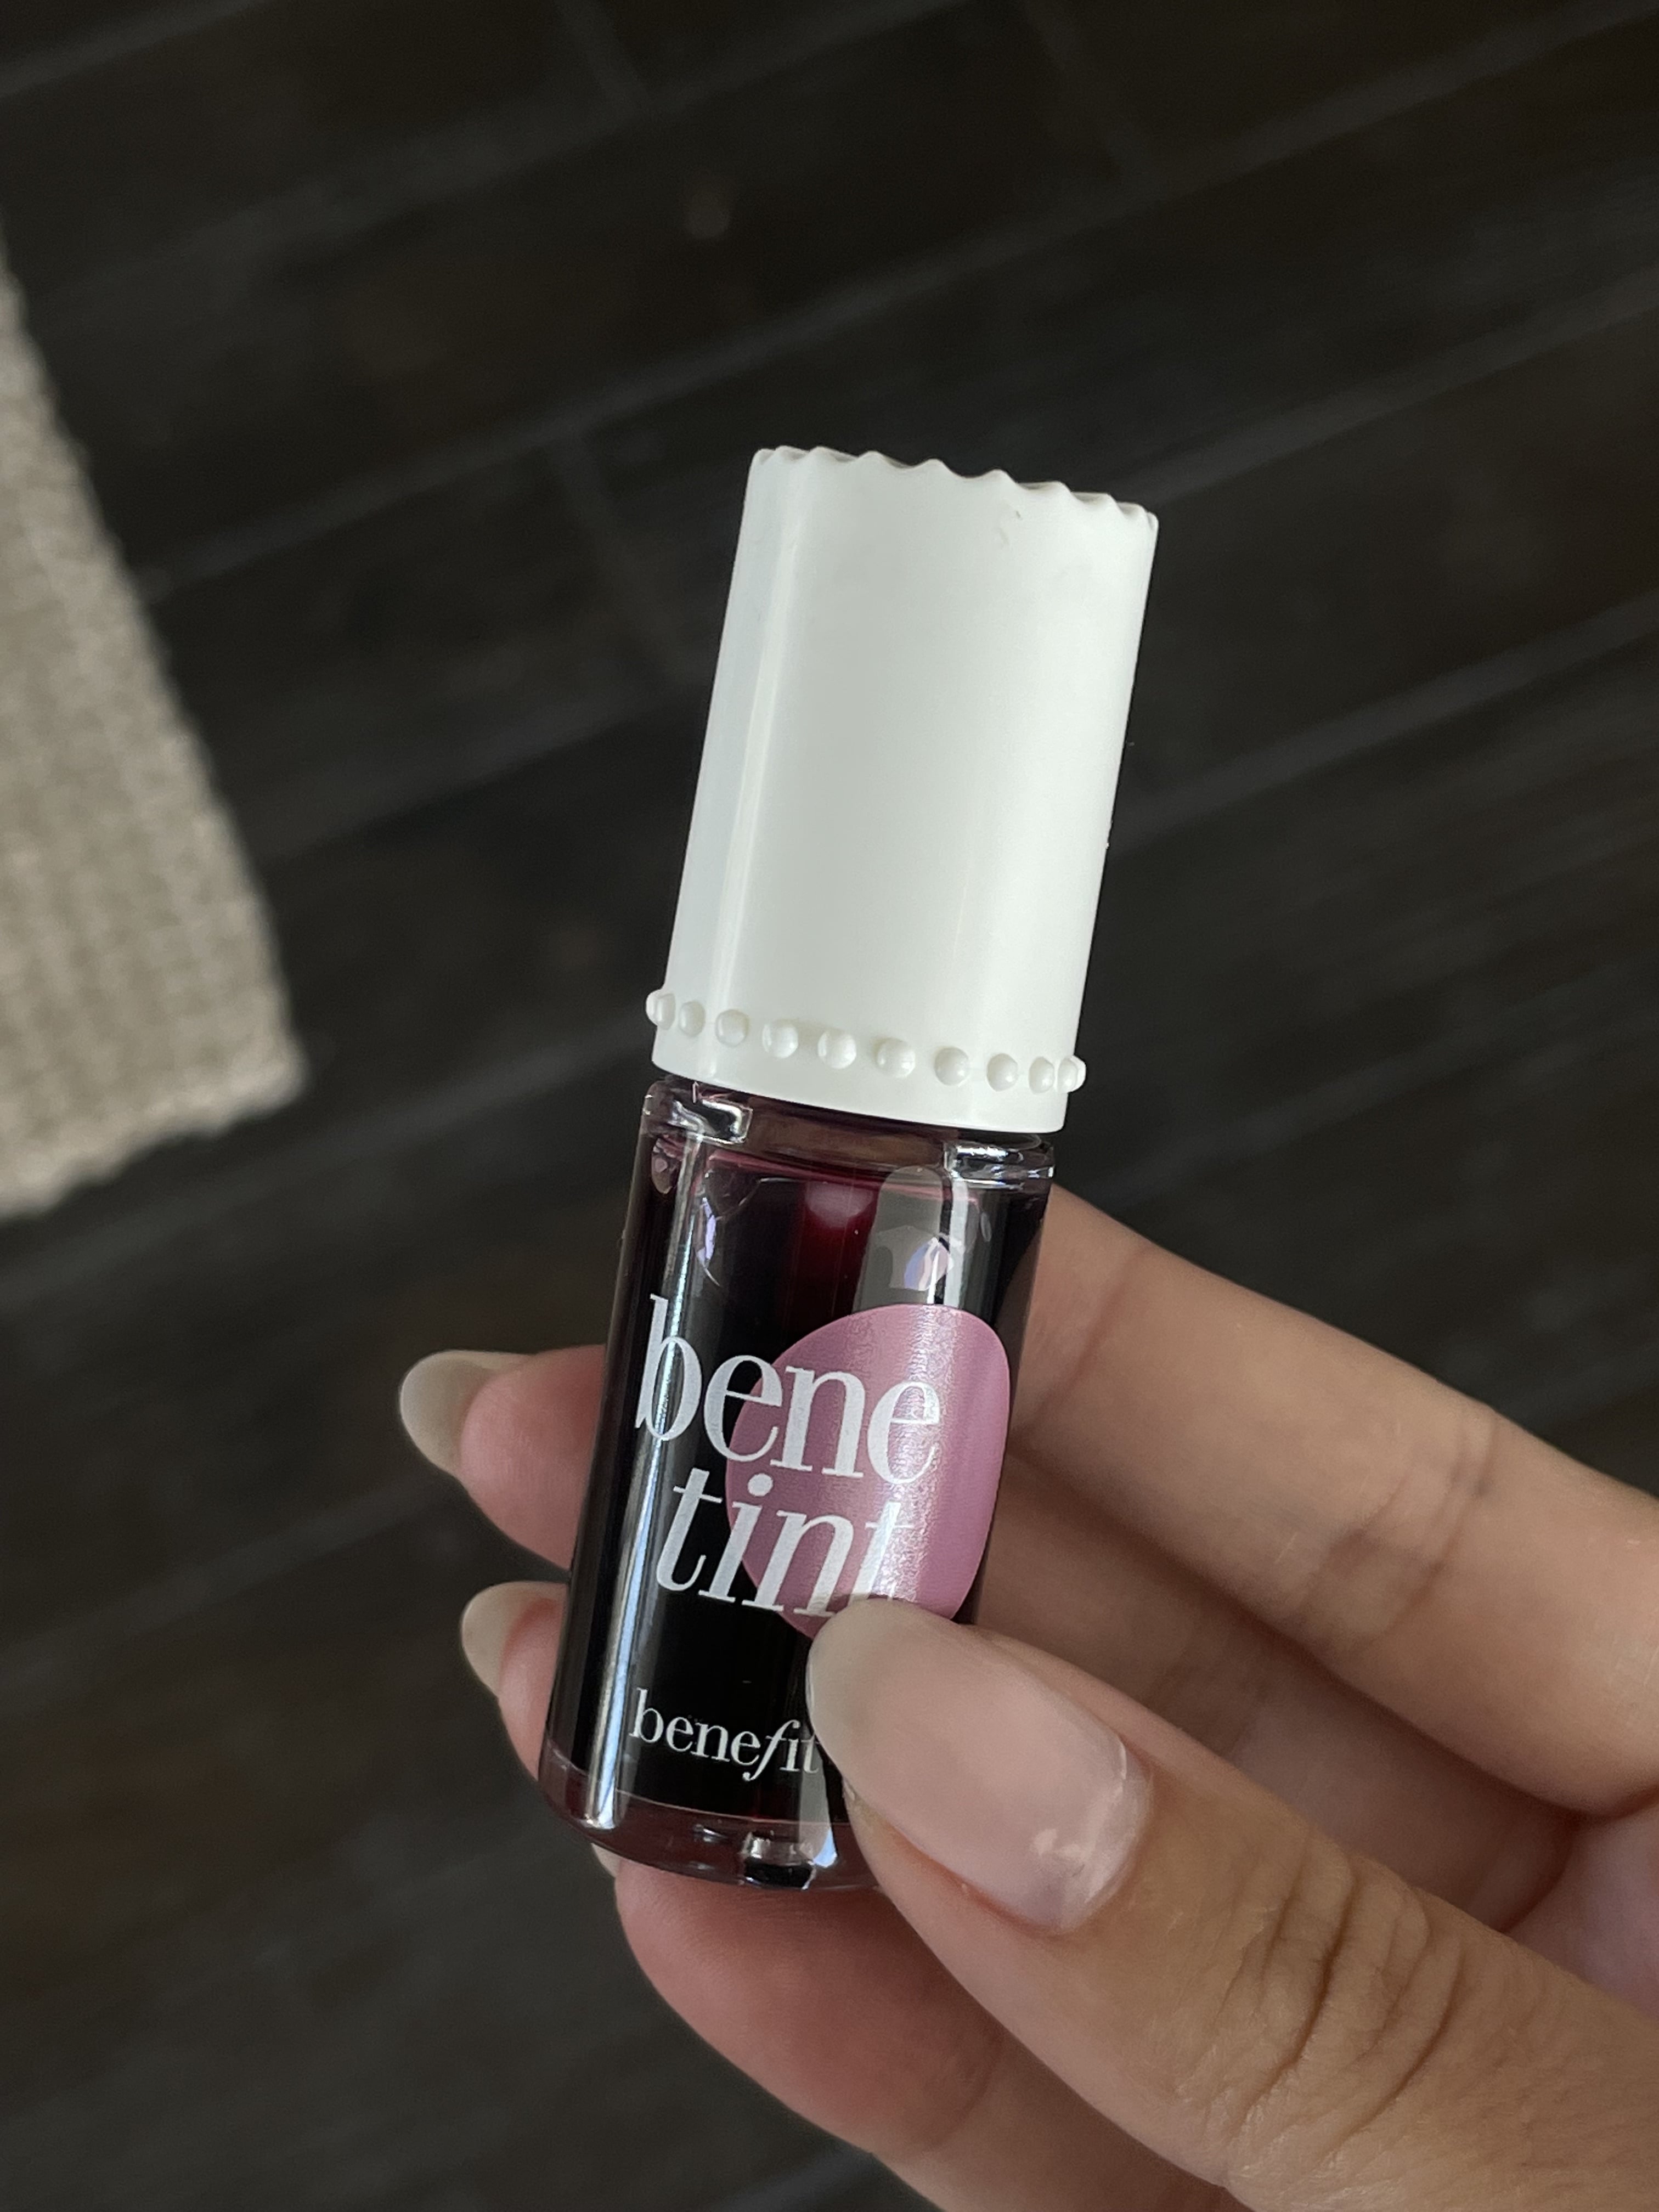 Beauty on Review: Benefit Makeup Application Review